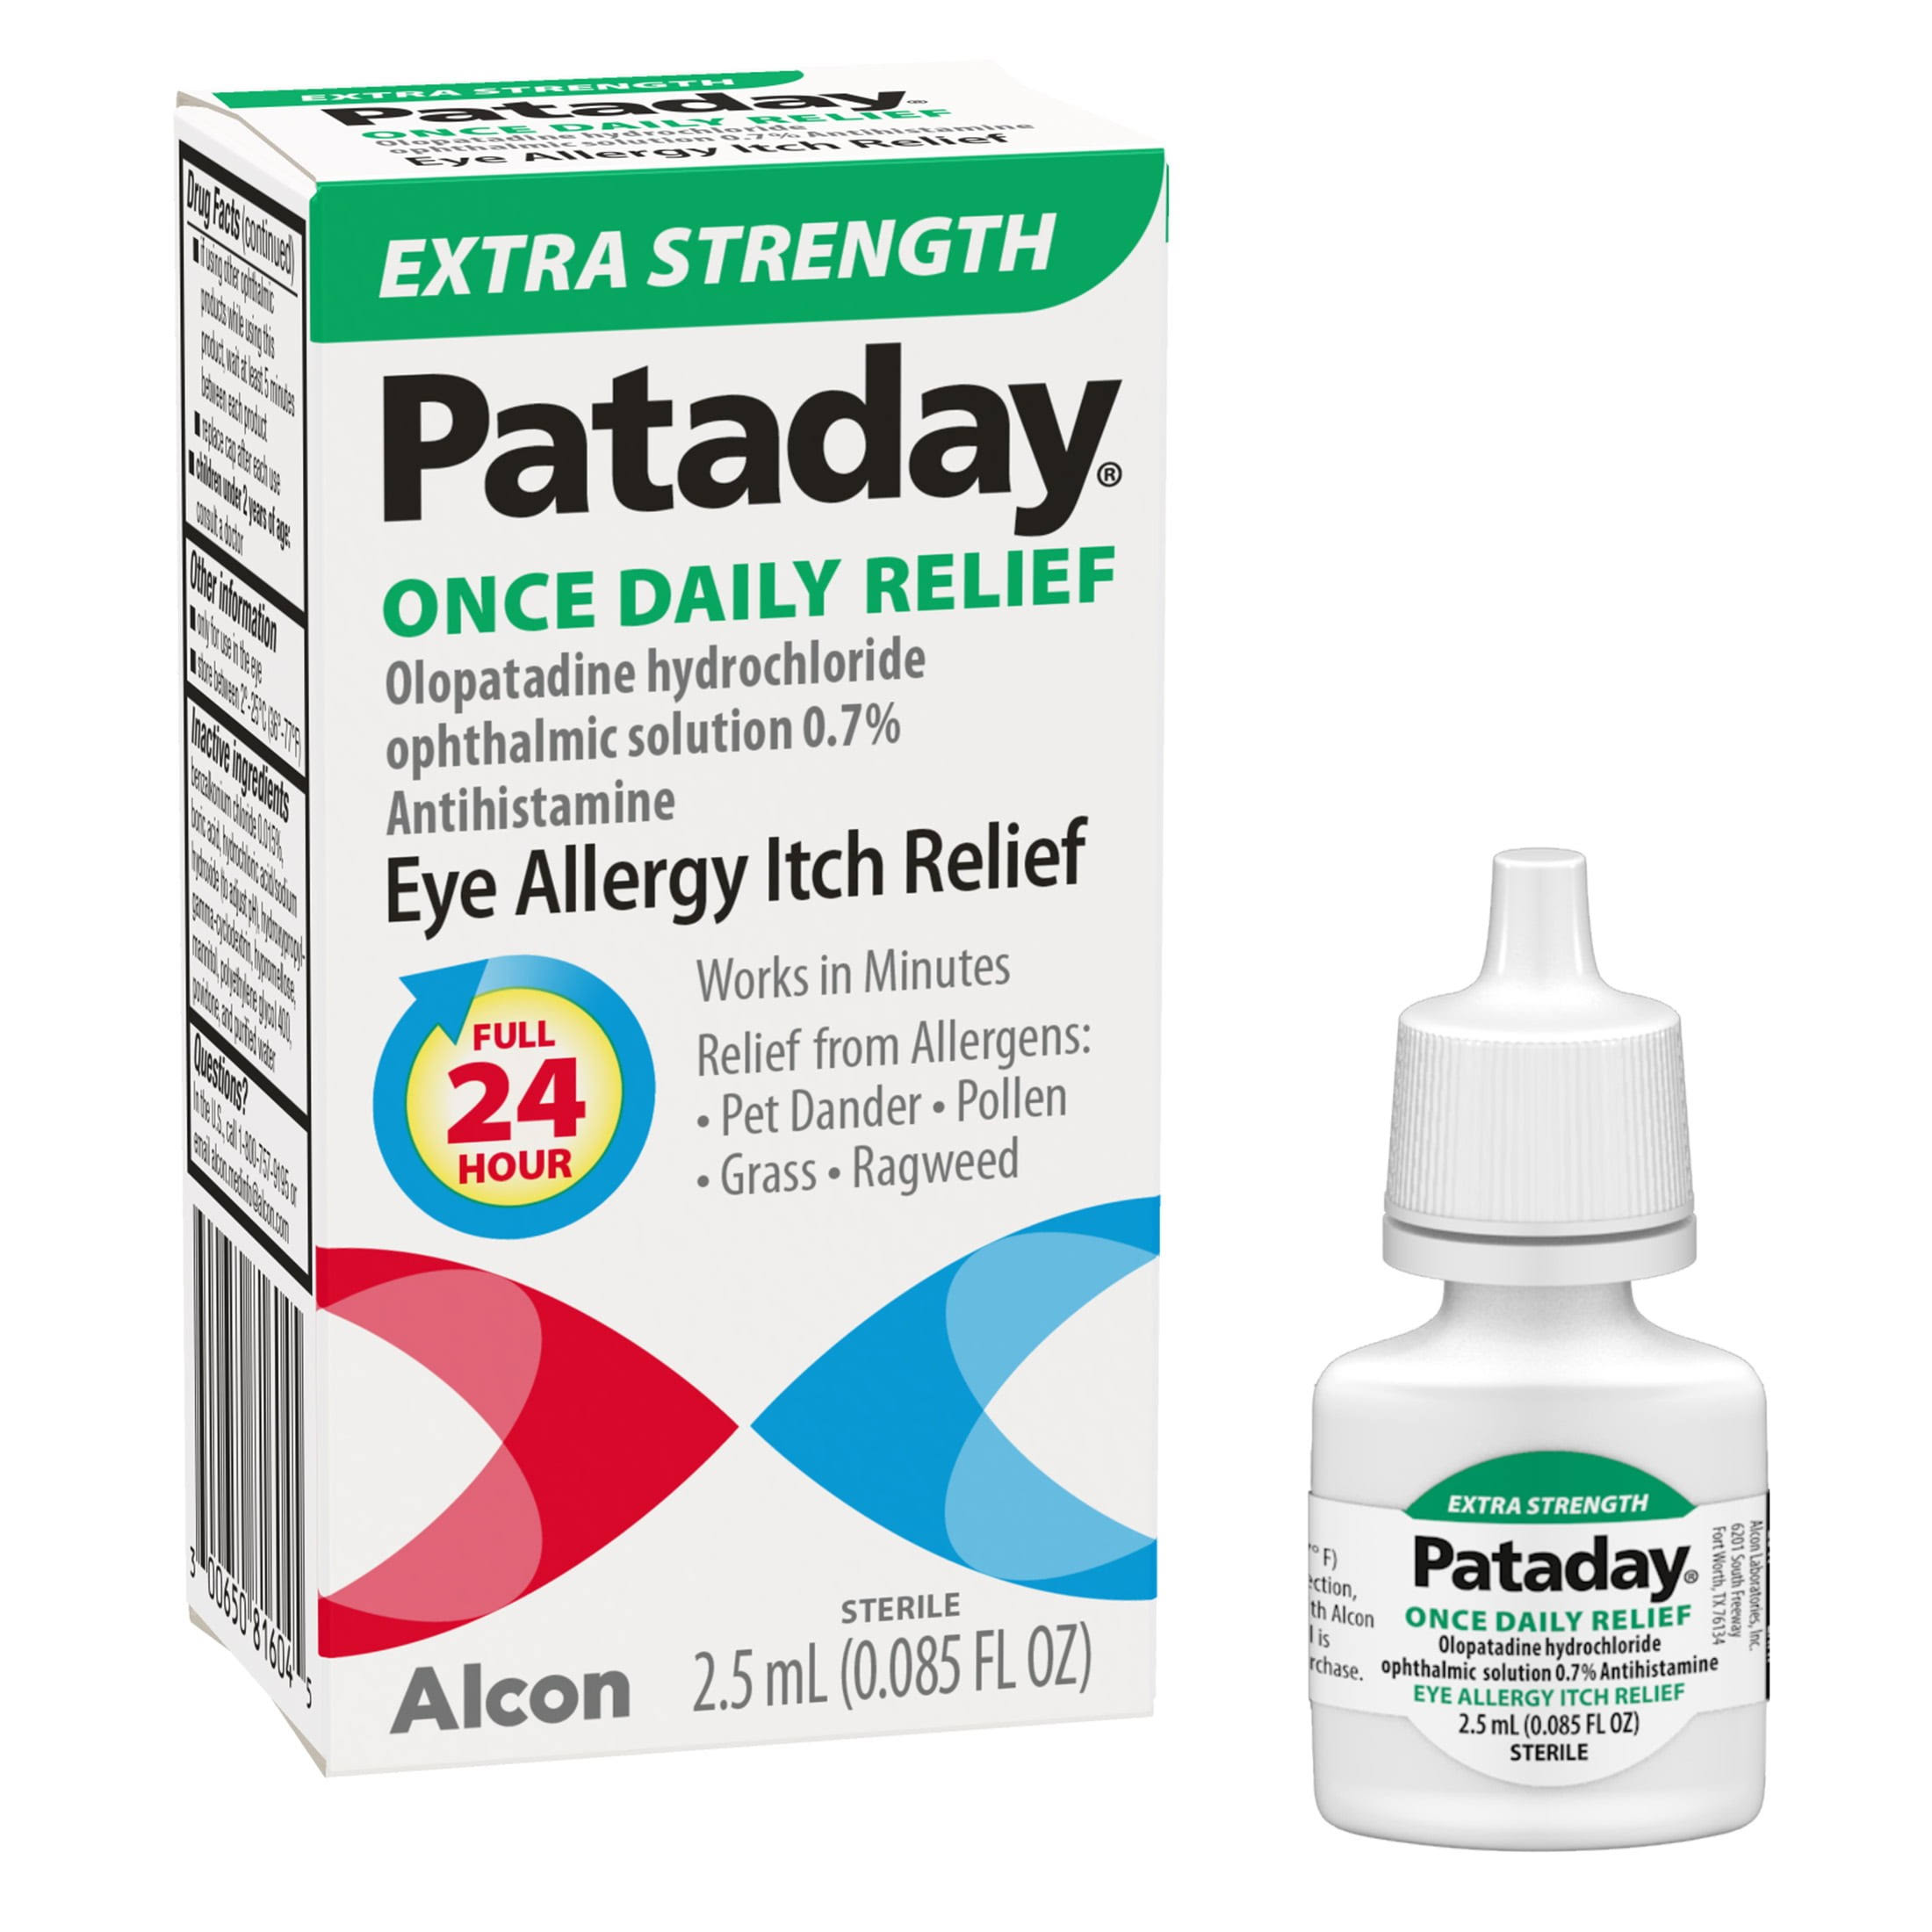 Pataday Eye Allergy Itch Relief, Extra Strength, For Ages 2 and Older - 2.5 ml